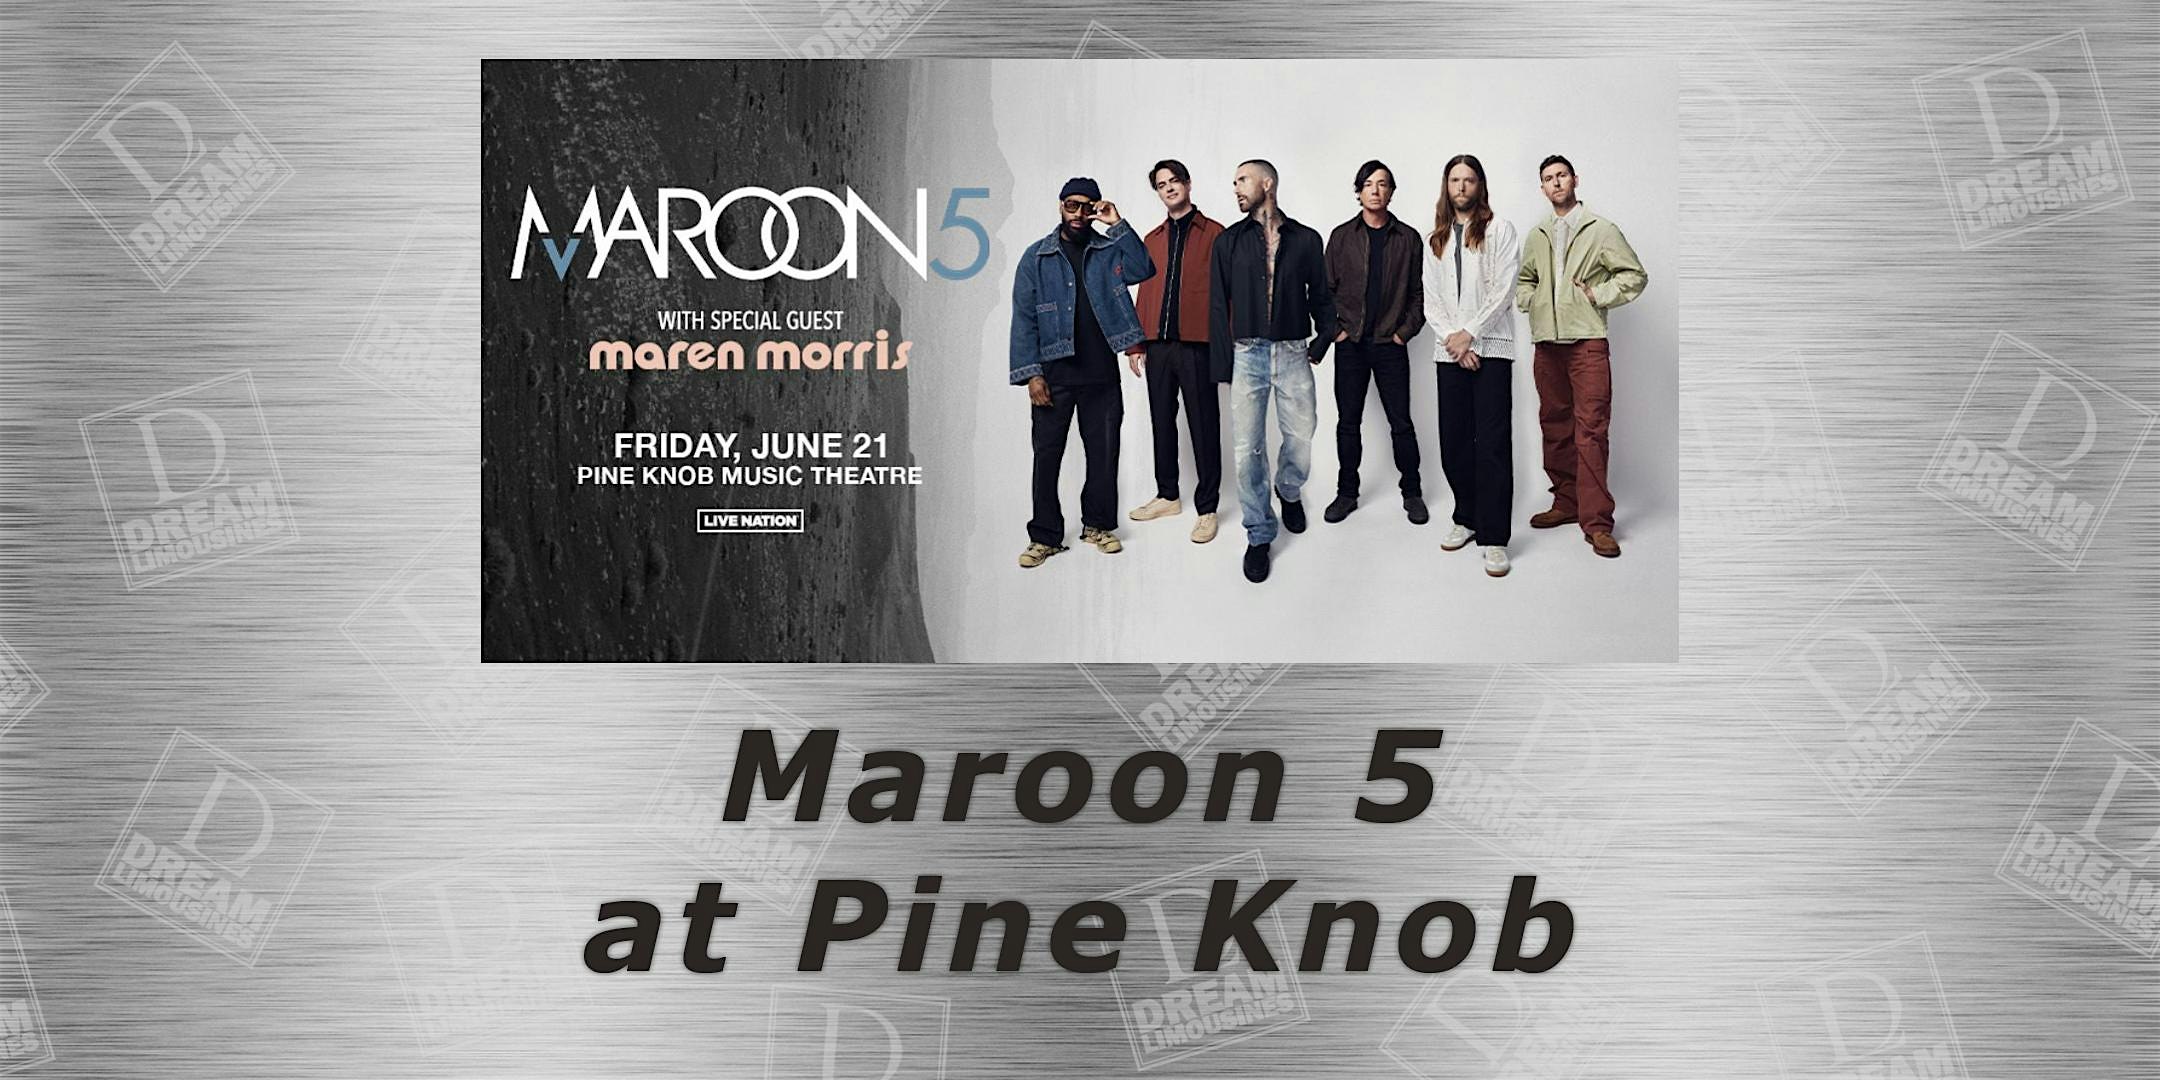 Shuttle Bus to See Maroon 5 at Pine Knob Music Theatre